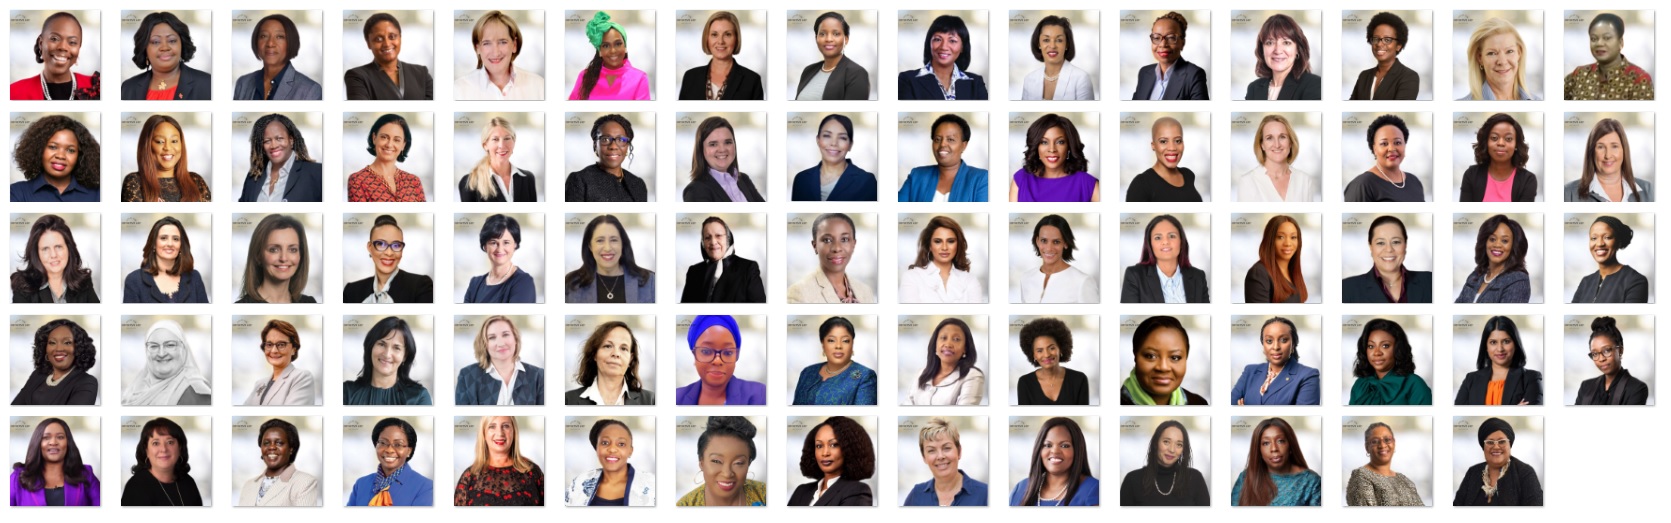 Africa.com Definitive List of Women CEOs expands by 50%